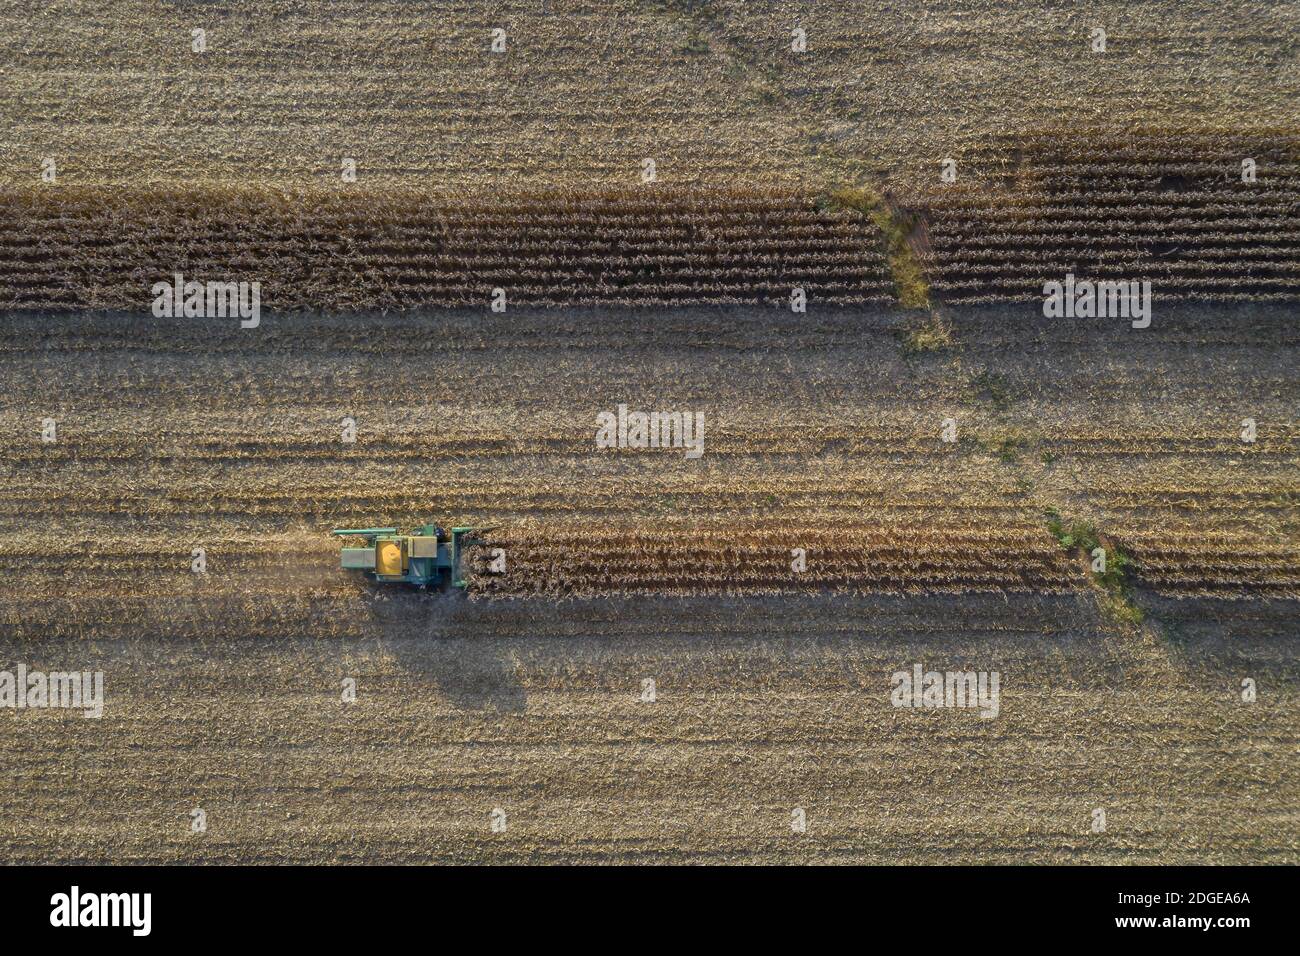 Aerial View Of Workers In A Field Harvesting Crops For Consumers Stock Photo